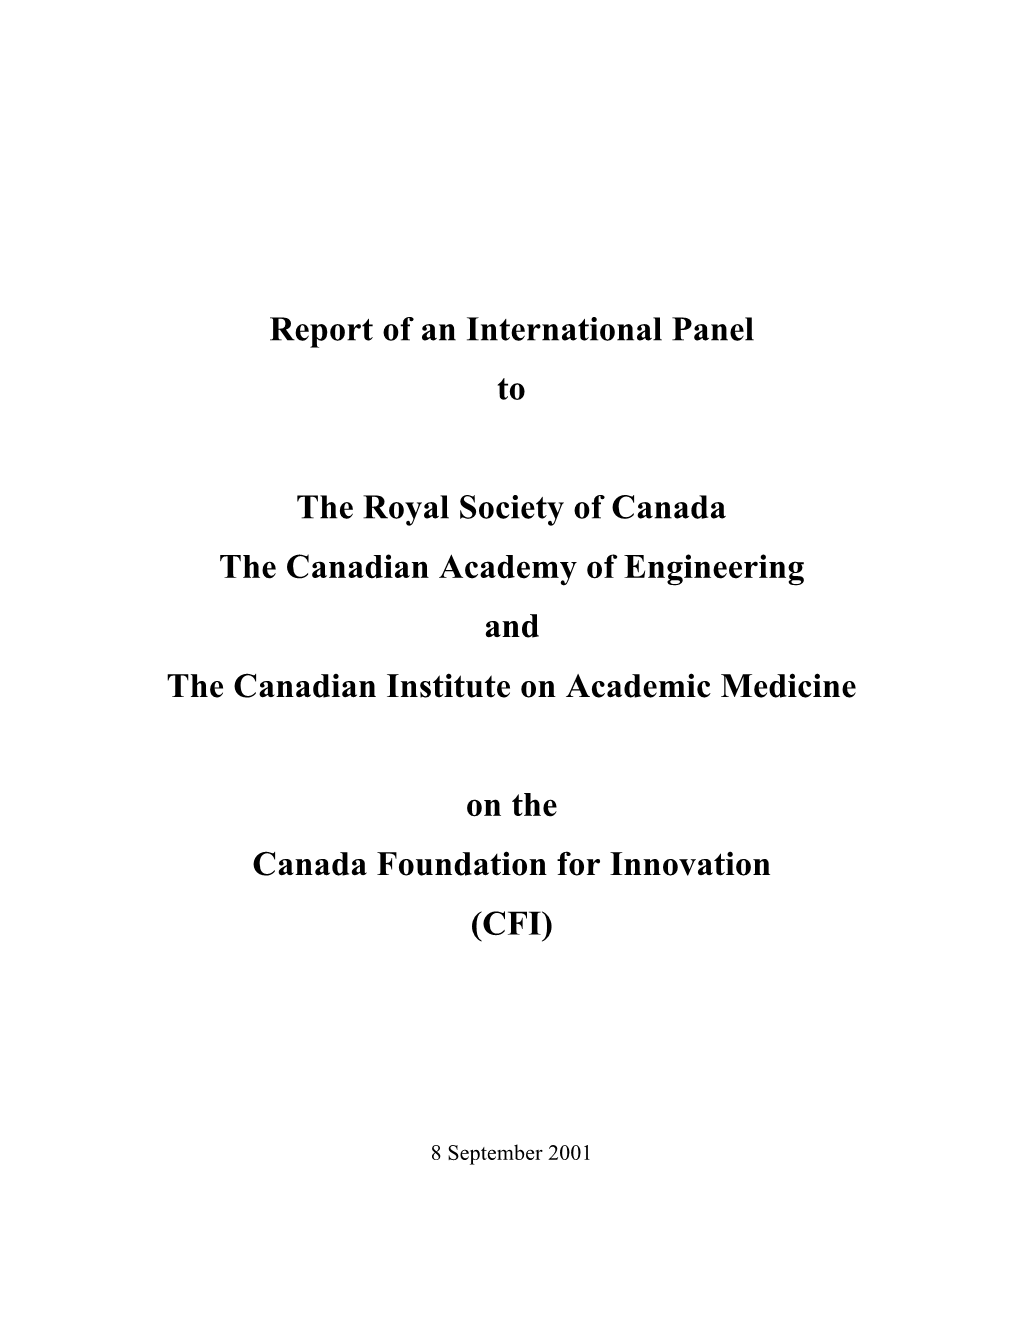 Report of an International Panel On